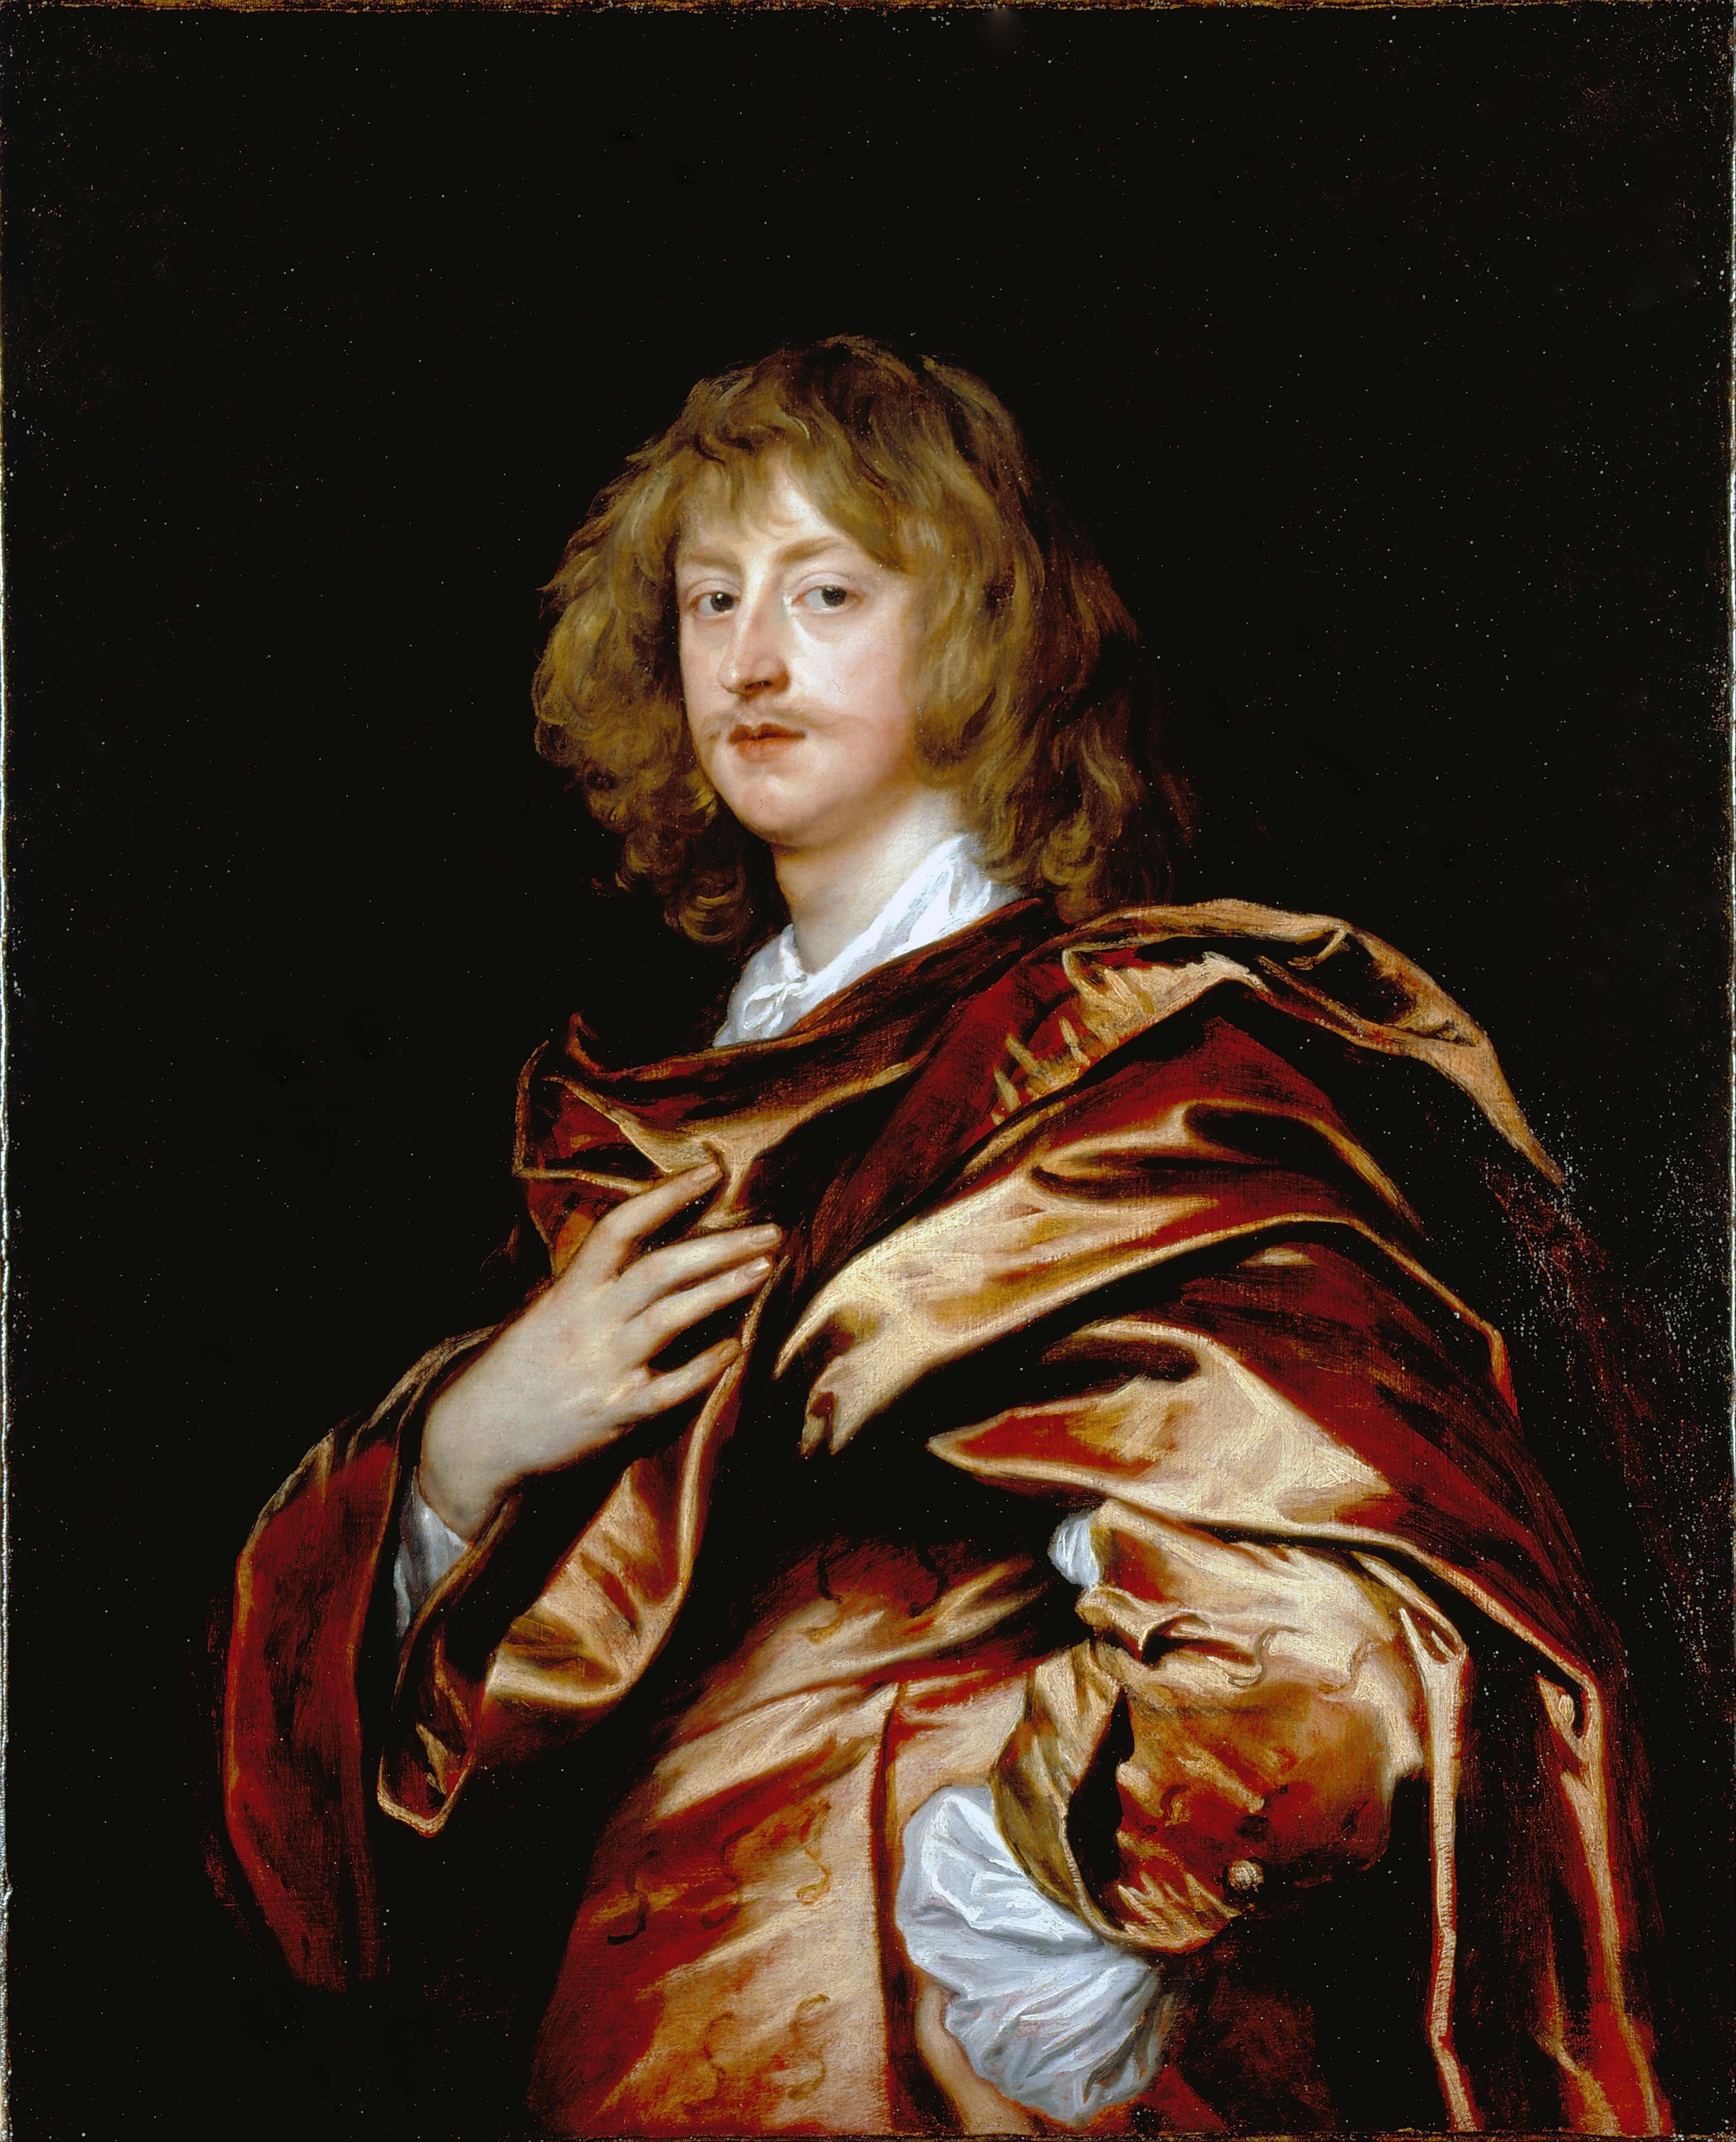 George Digby, 2nd Earl of Bristol by Anthony van Dyck - c. 1638 - 103.2 x 83.2 cm Dulwich Picture Gallery